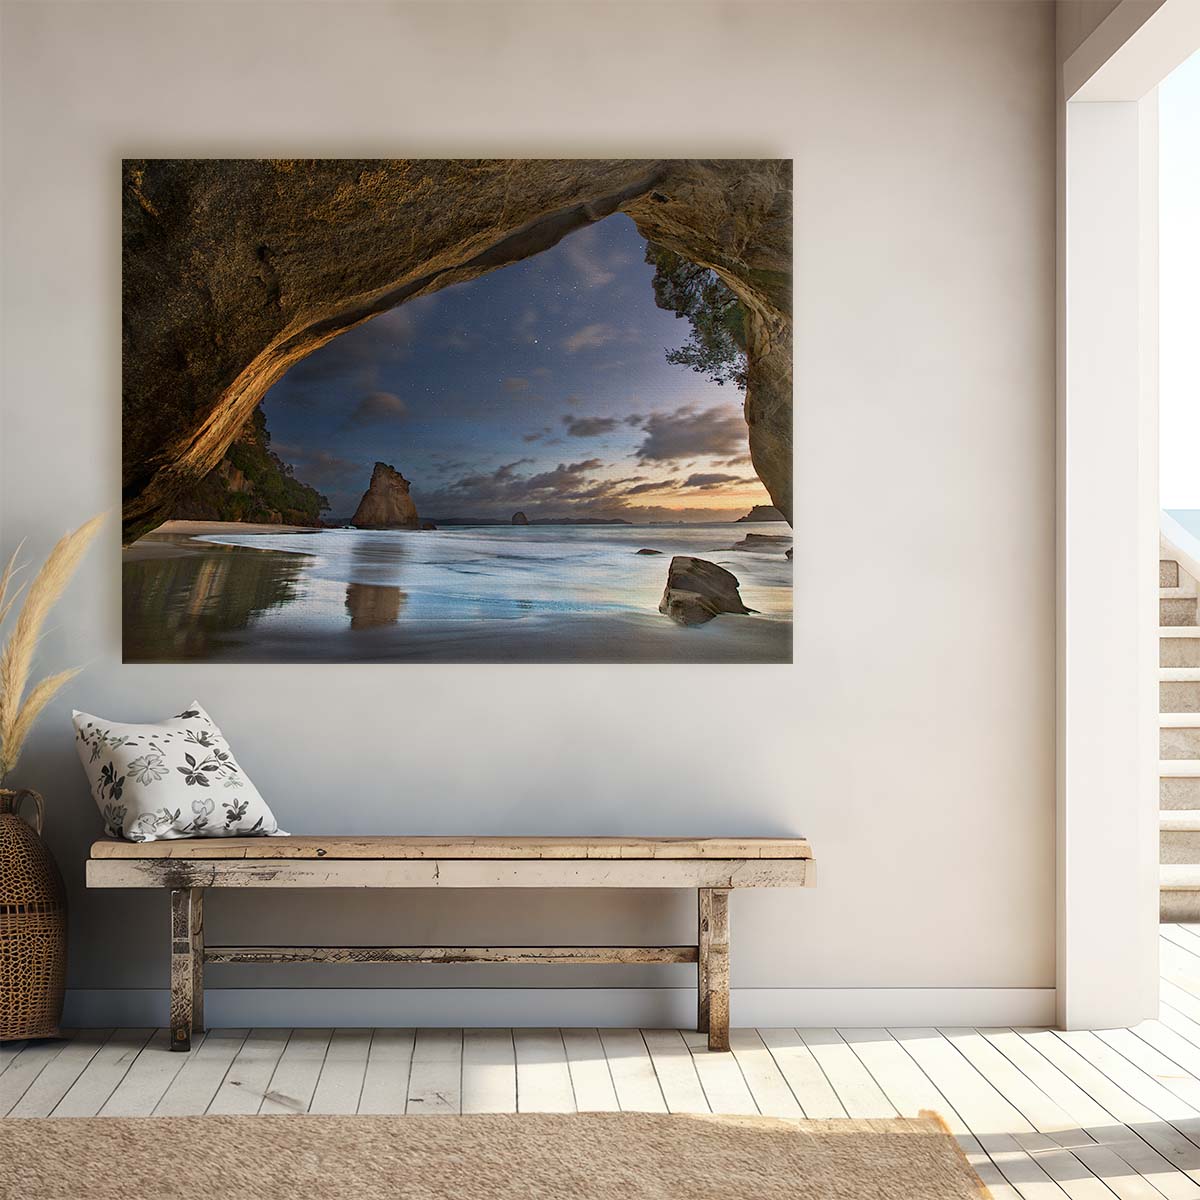 New Zealand Cathedral Cove Sunset Seascape Wall Art by Luxuriance Designs. Made in USA.